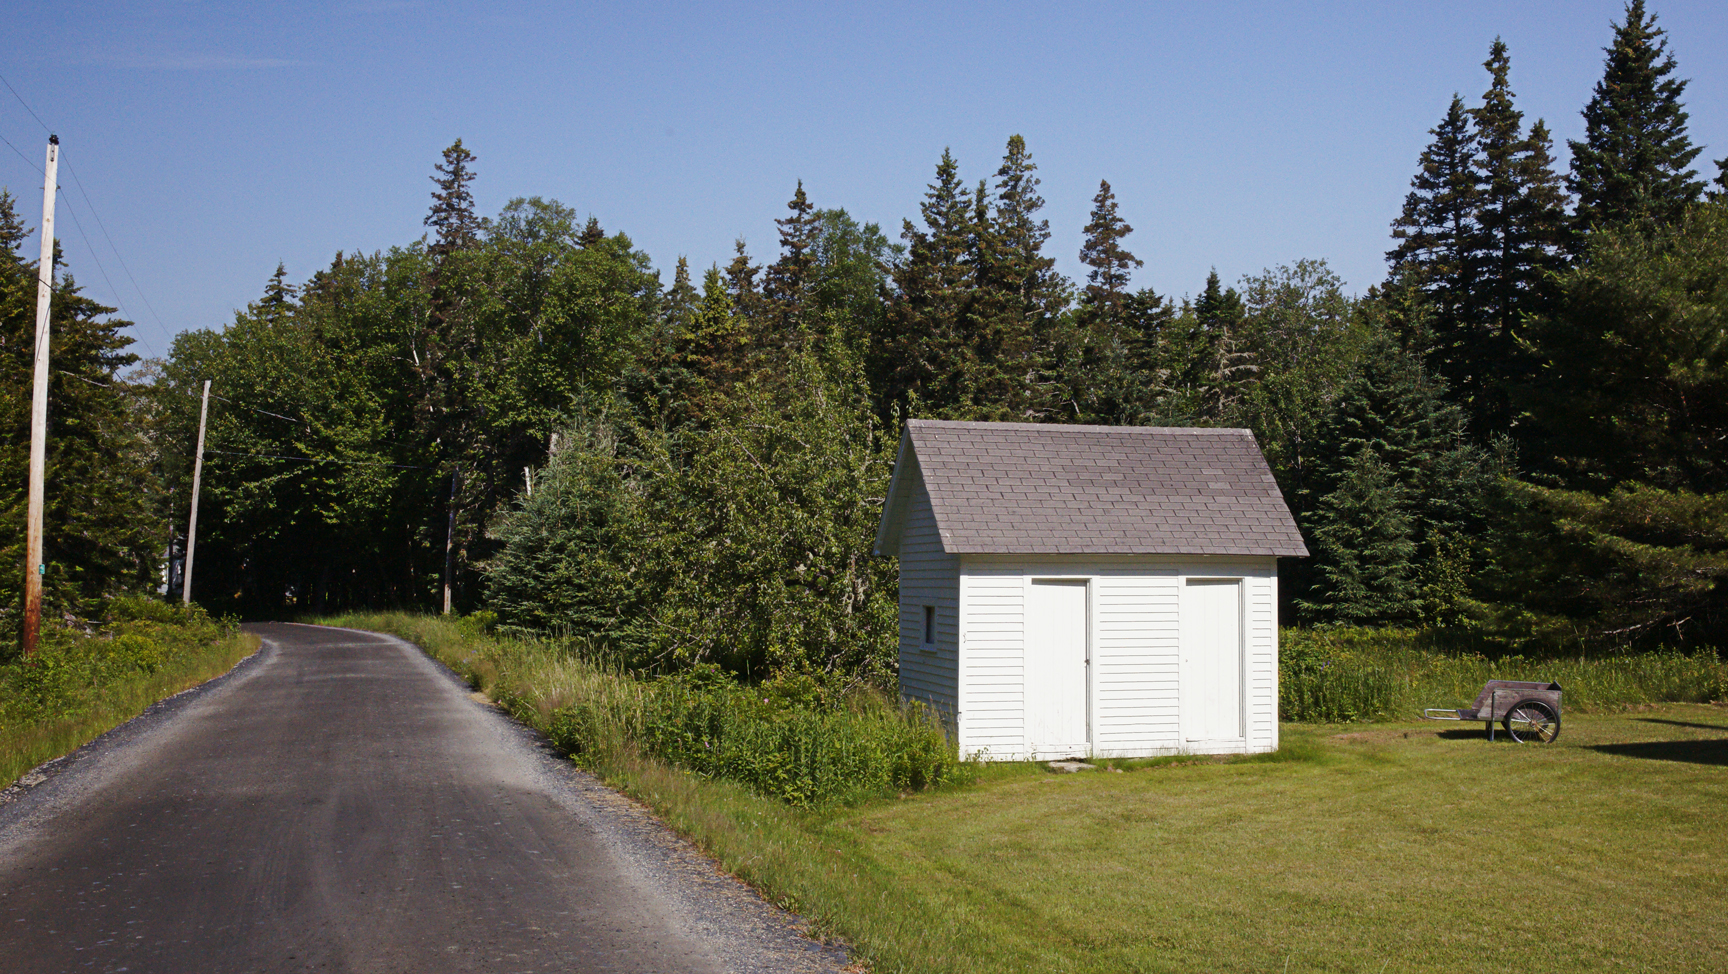 A white shed, and an empty road.